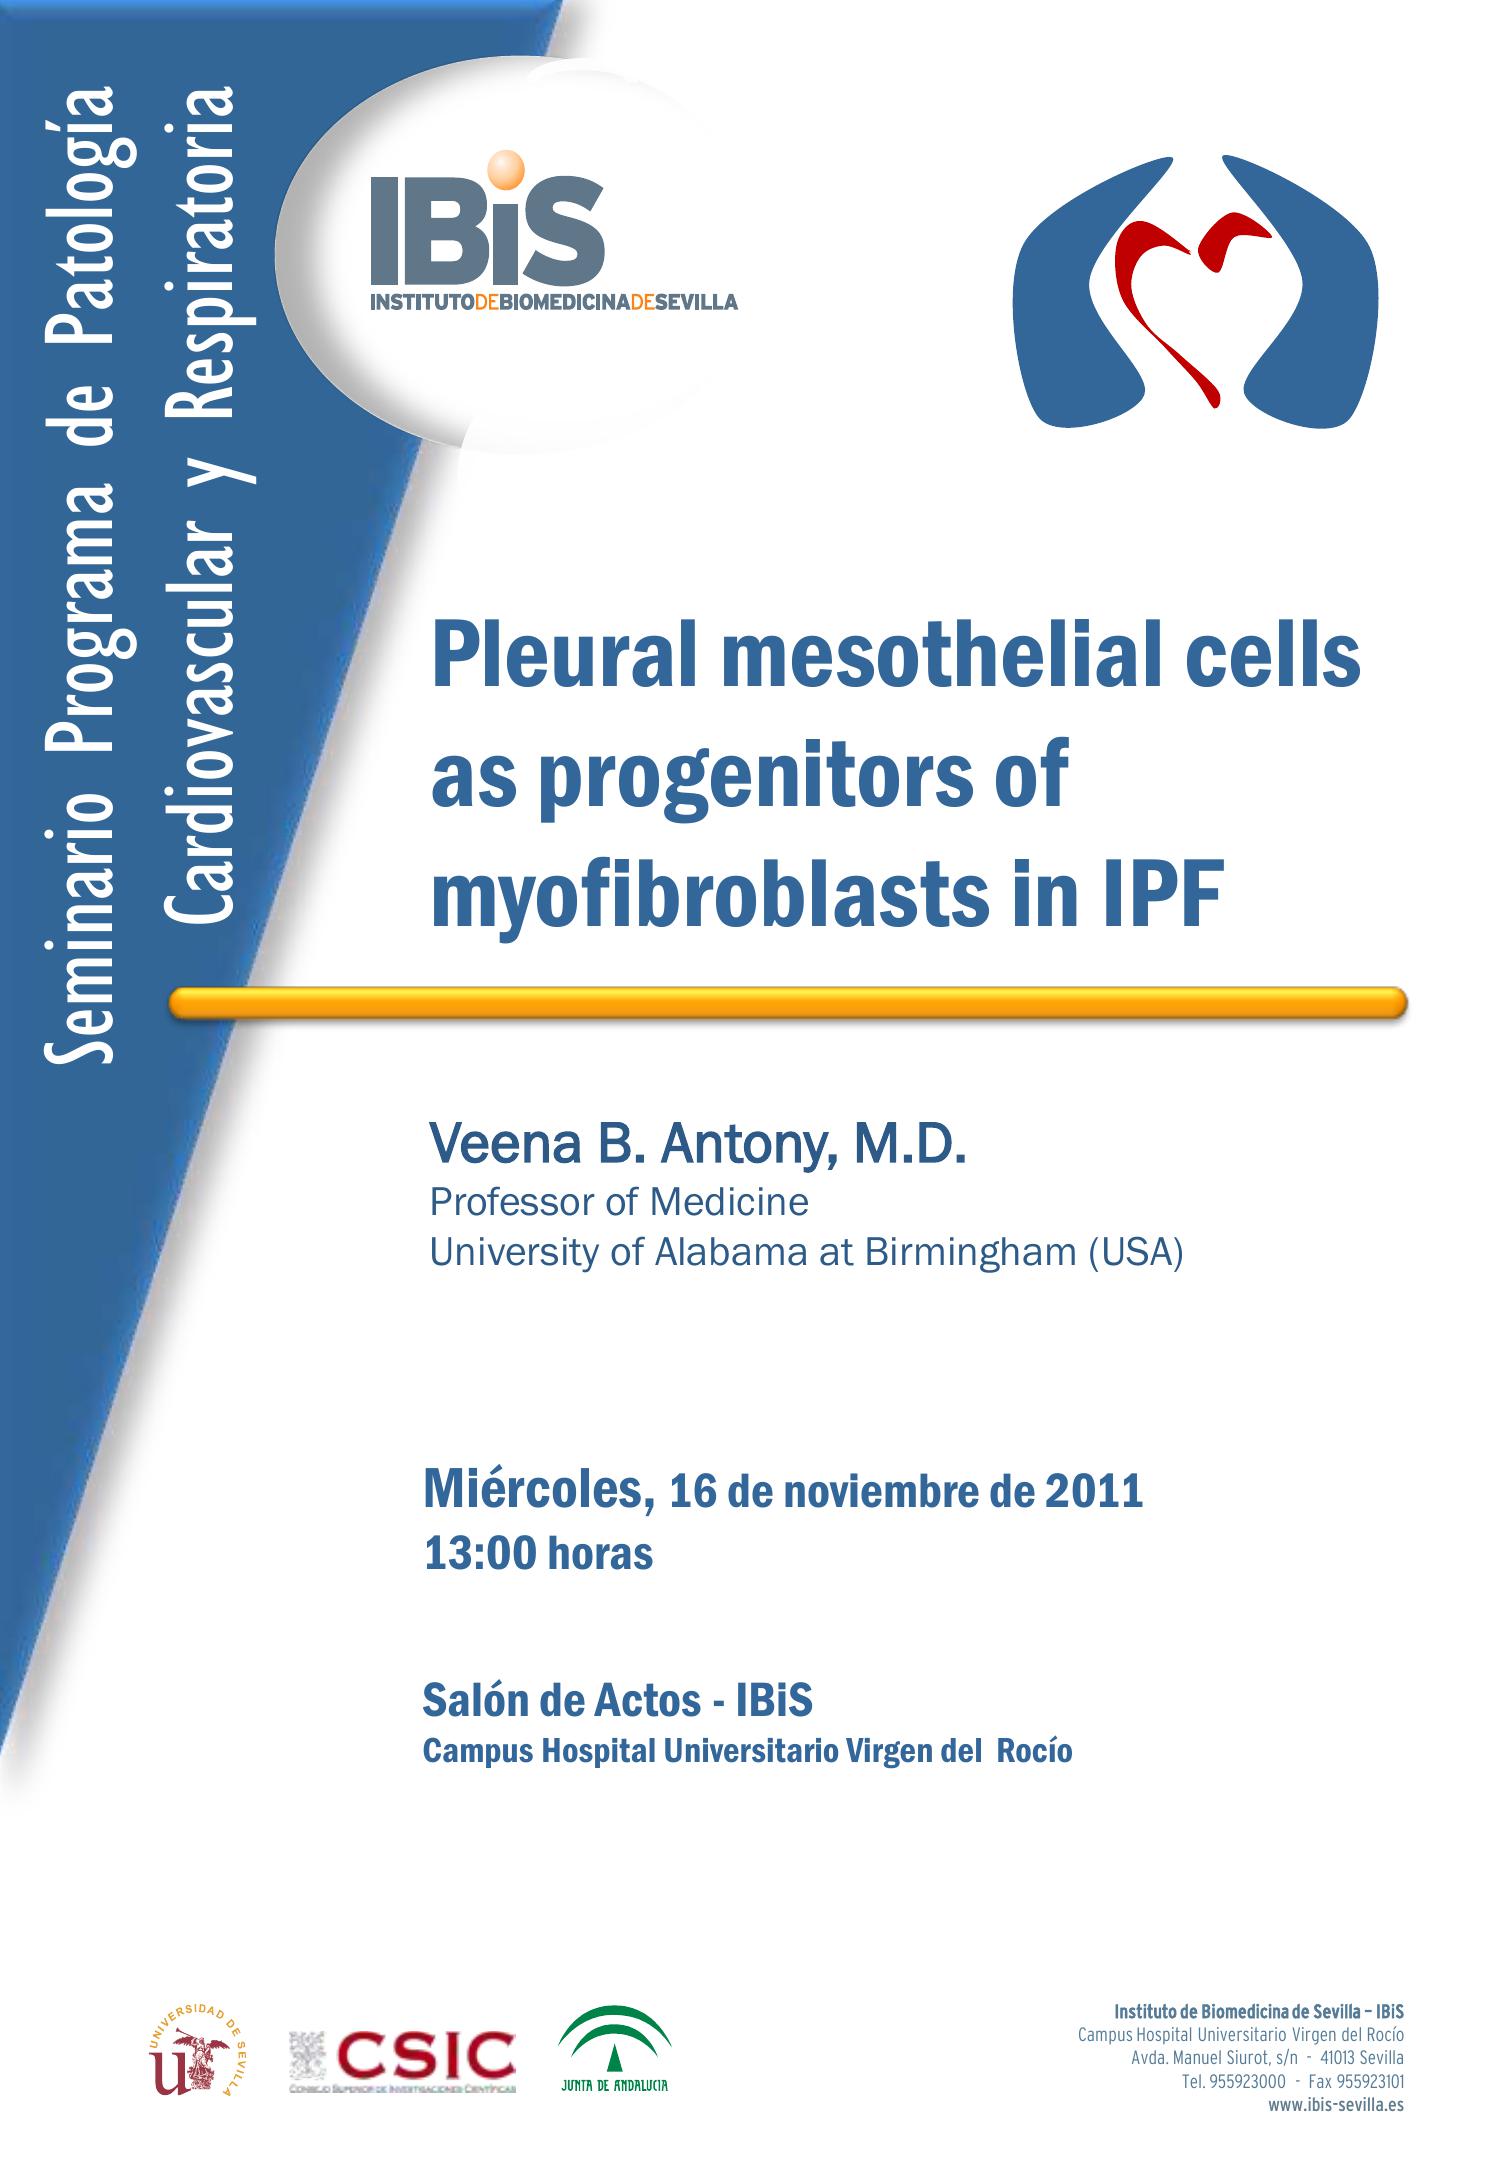 Poster: Pleural mesothelial cells as progenitors of myofibroblasts in IPF.